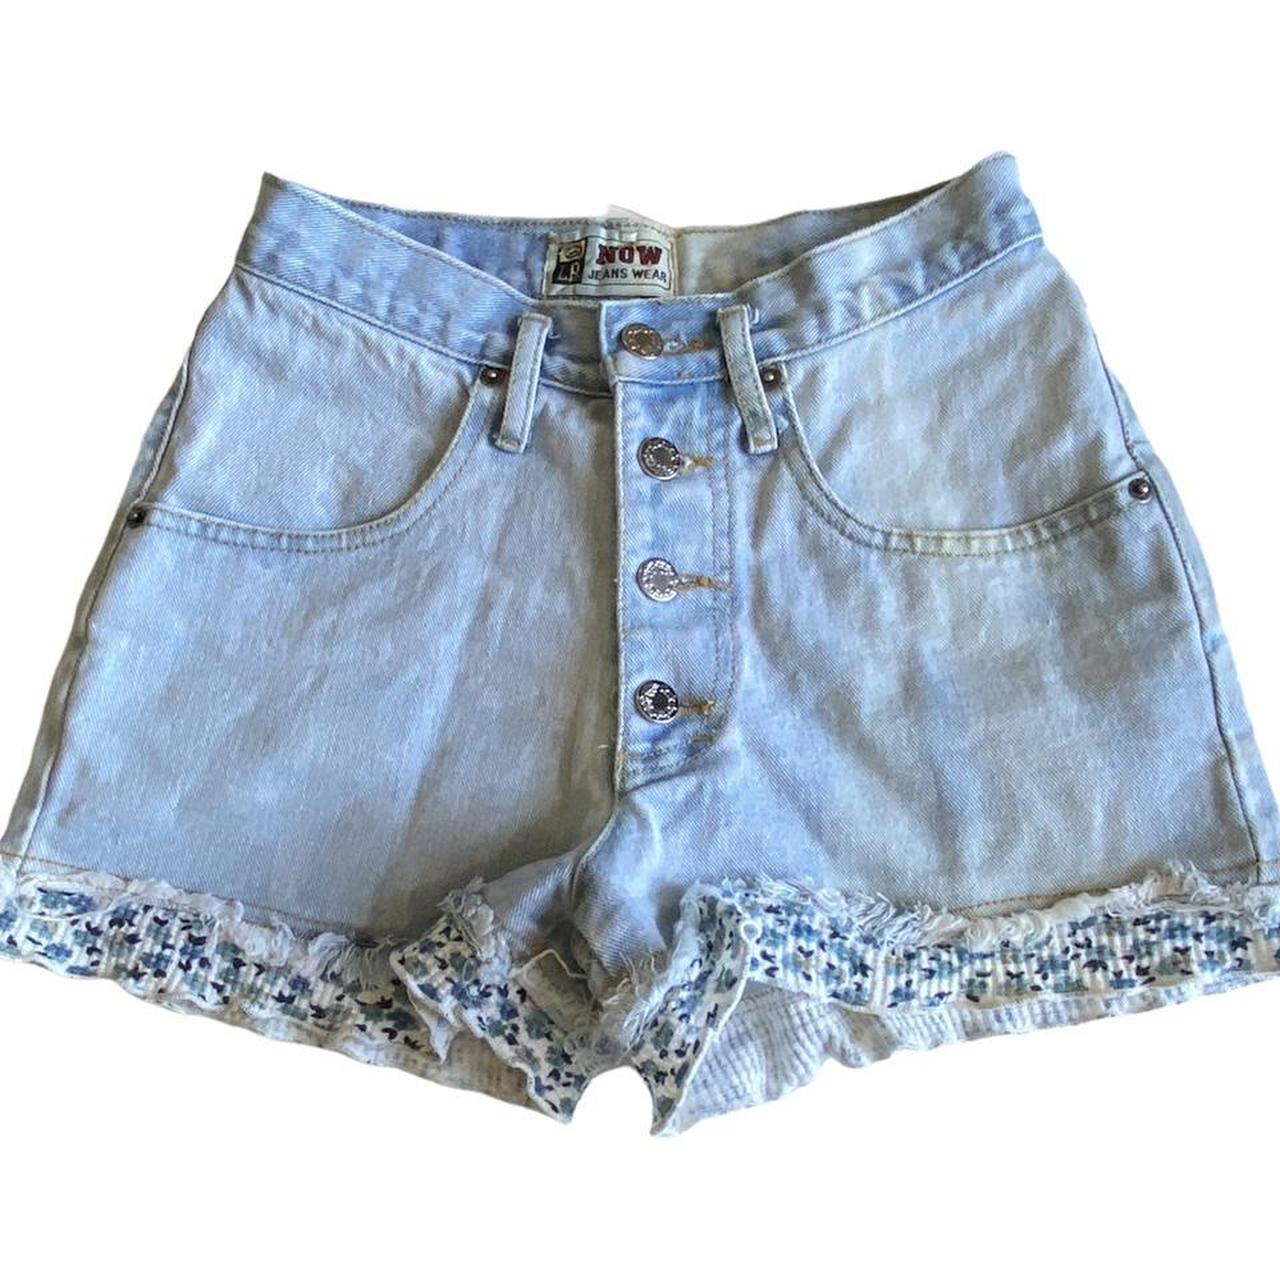 High Waisted Denim Mom Shorts - How To Style Them Now.